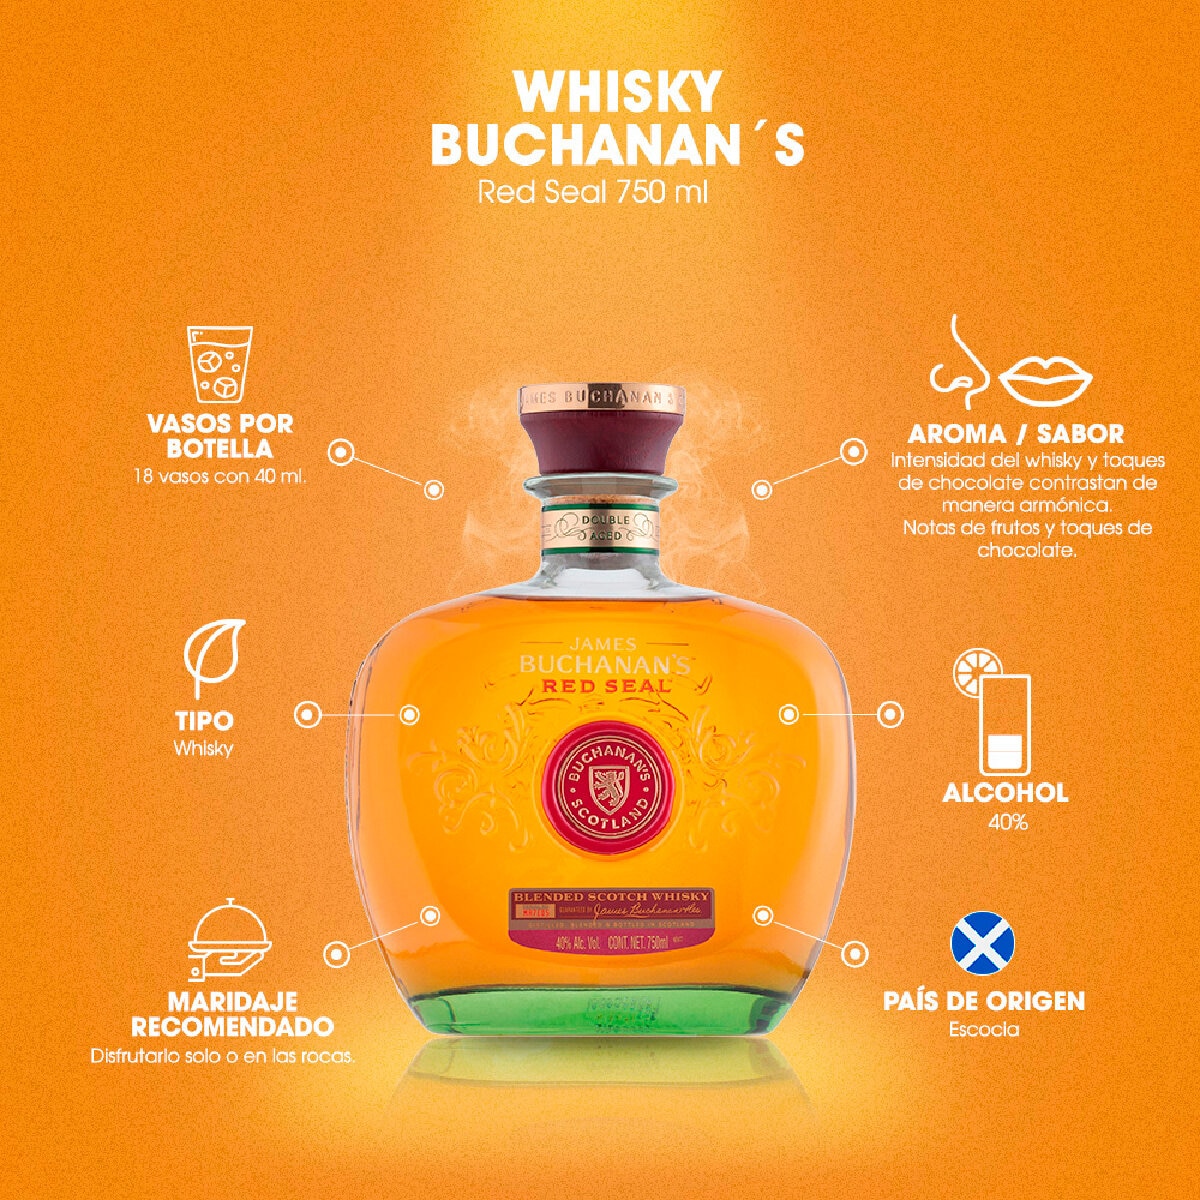 Whisky Buchanan's Red Seal Blended Scotch 750 ml